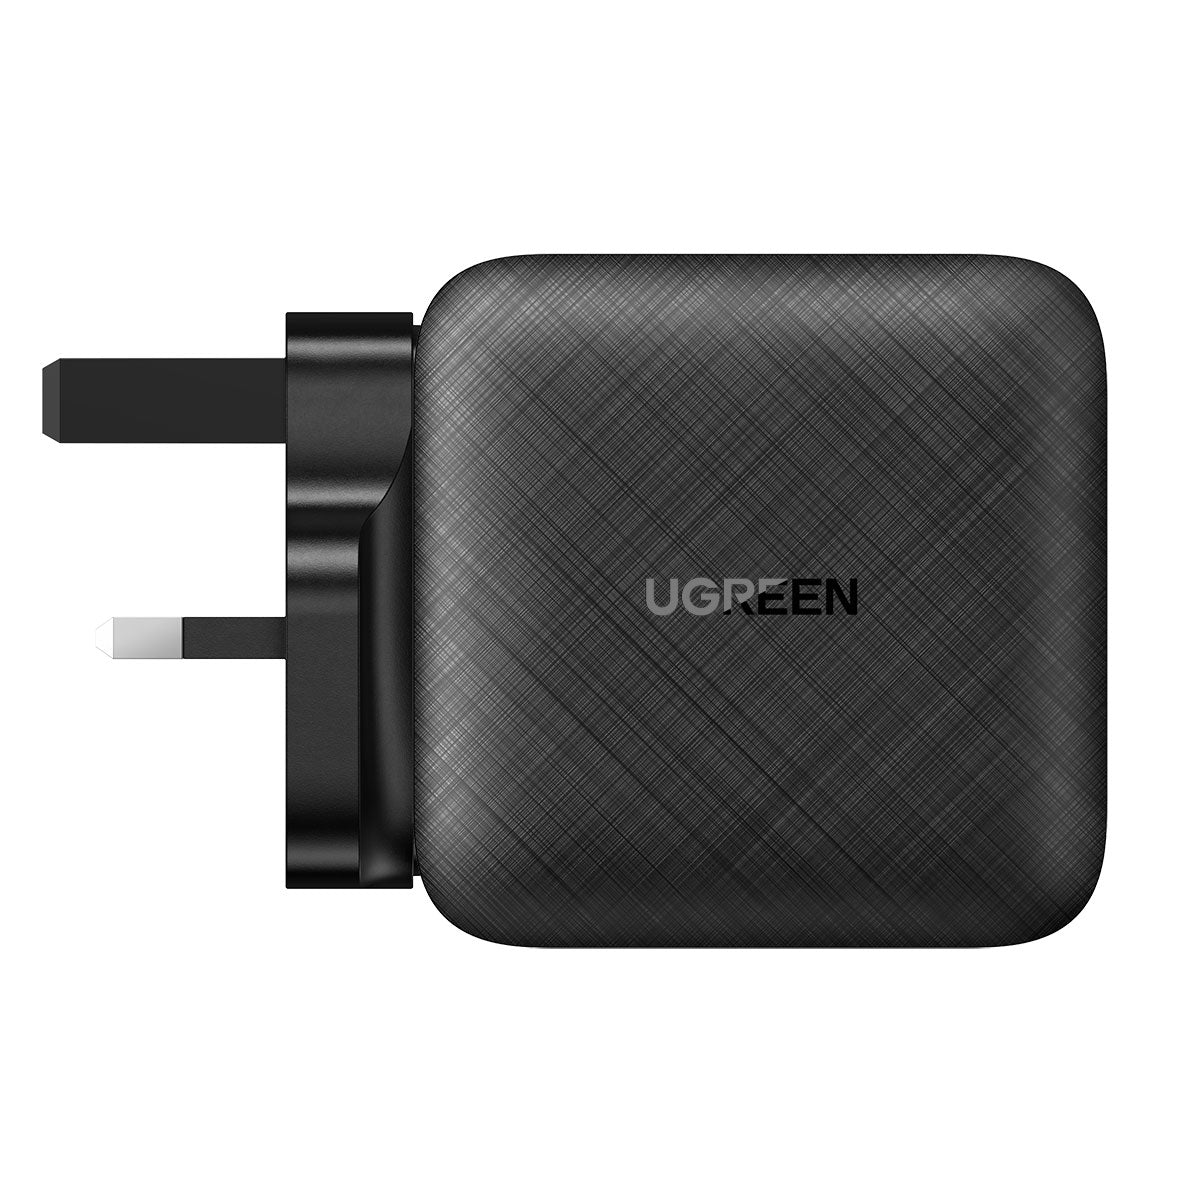 UGREEN 65W USB Wall Charger (4-Ports) 插牆式USB充電器 充電器 Microworks Online Store